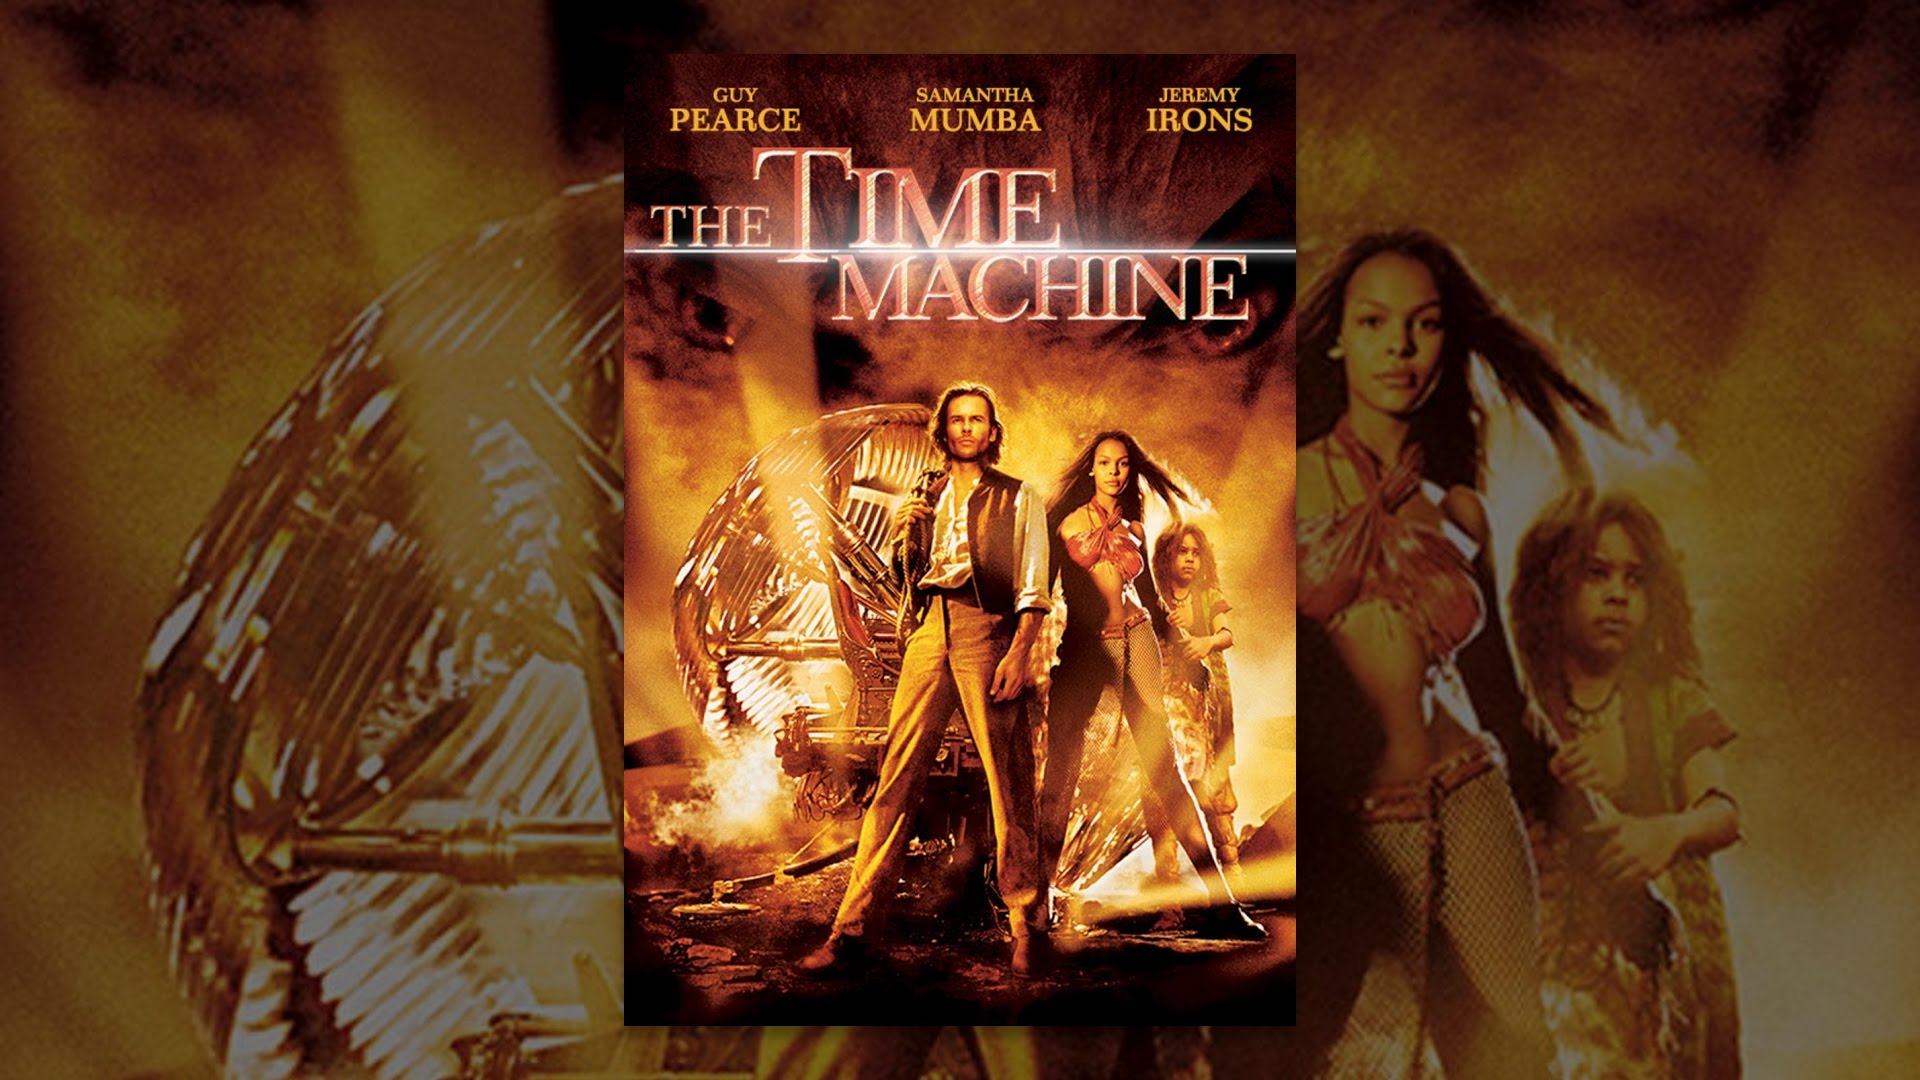 The Time Machine (2002) Wallpapers